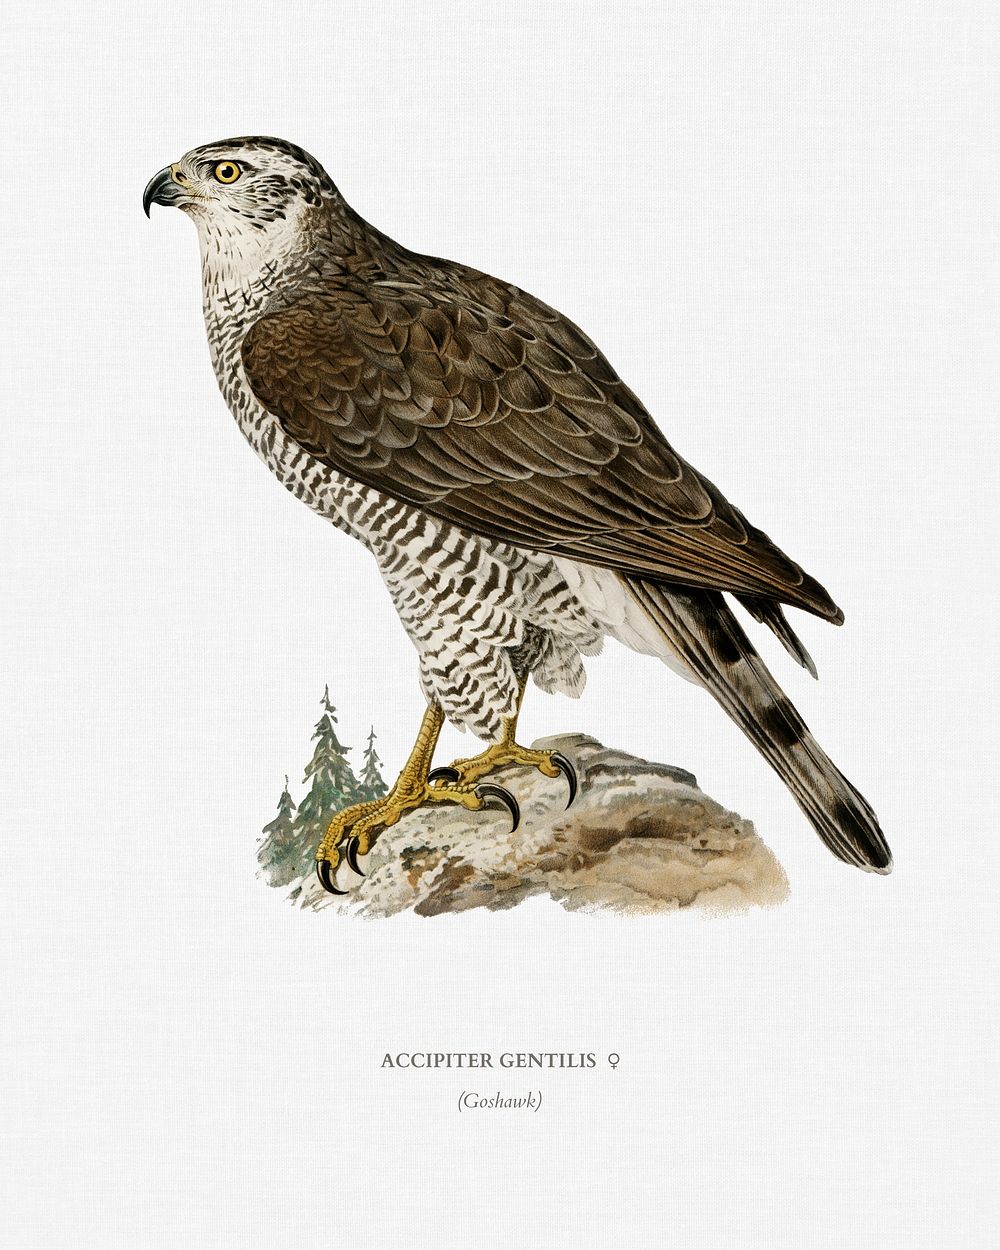 Goshawk female (Accipiter gentilis) illustrated by the von Wright brothers. Digitally enhanced from our own 1929 folio…